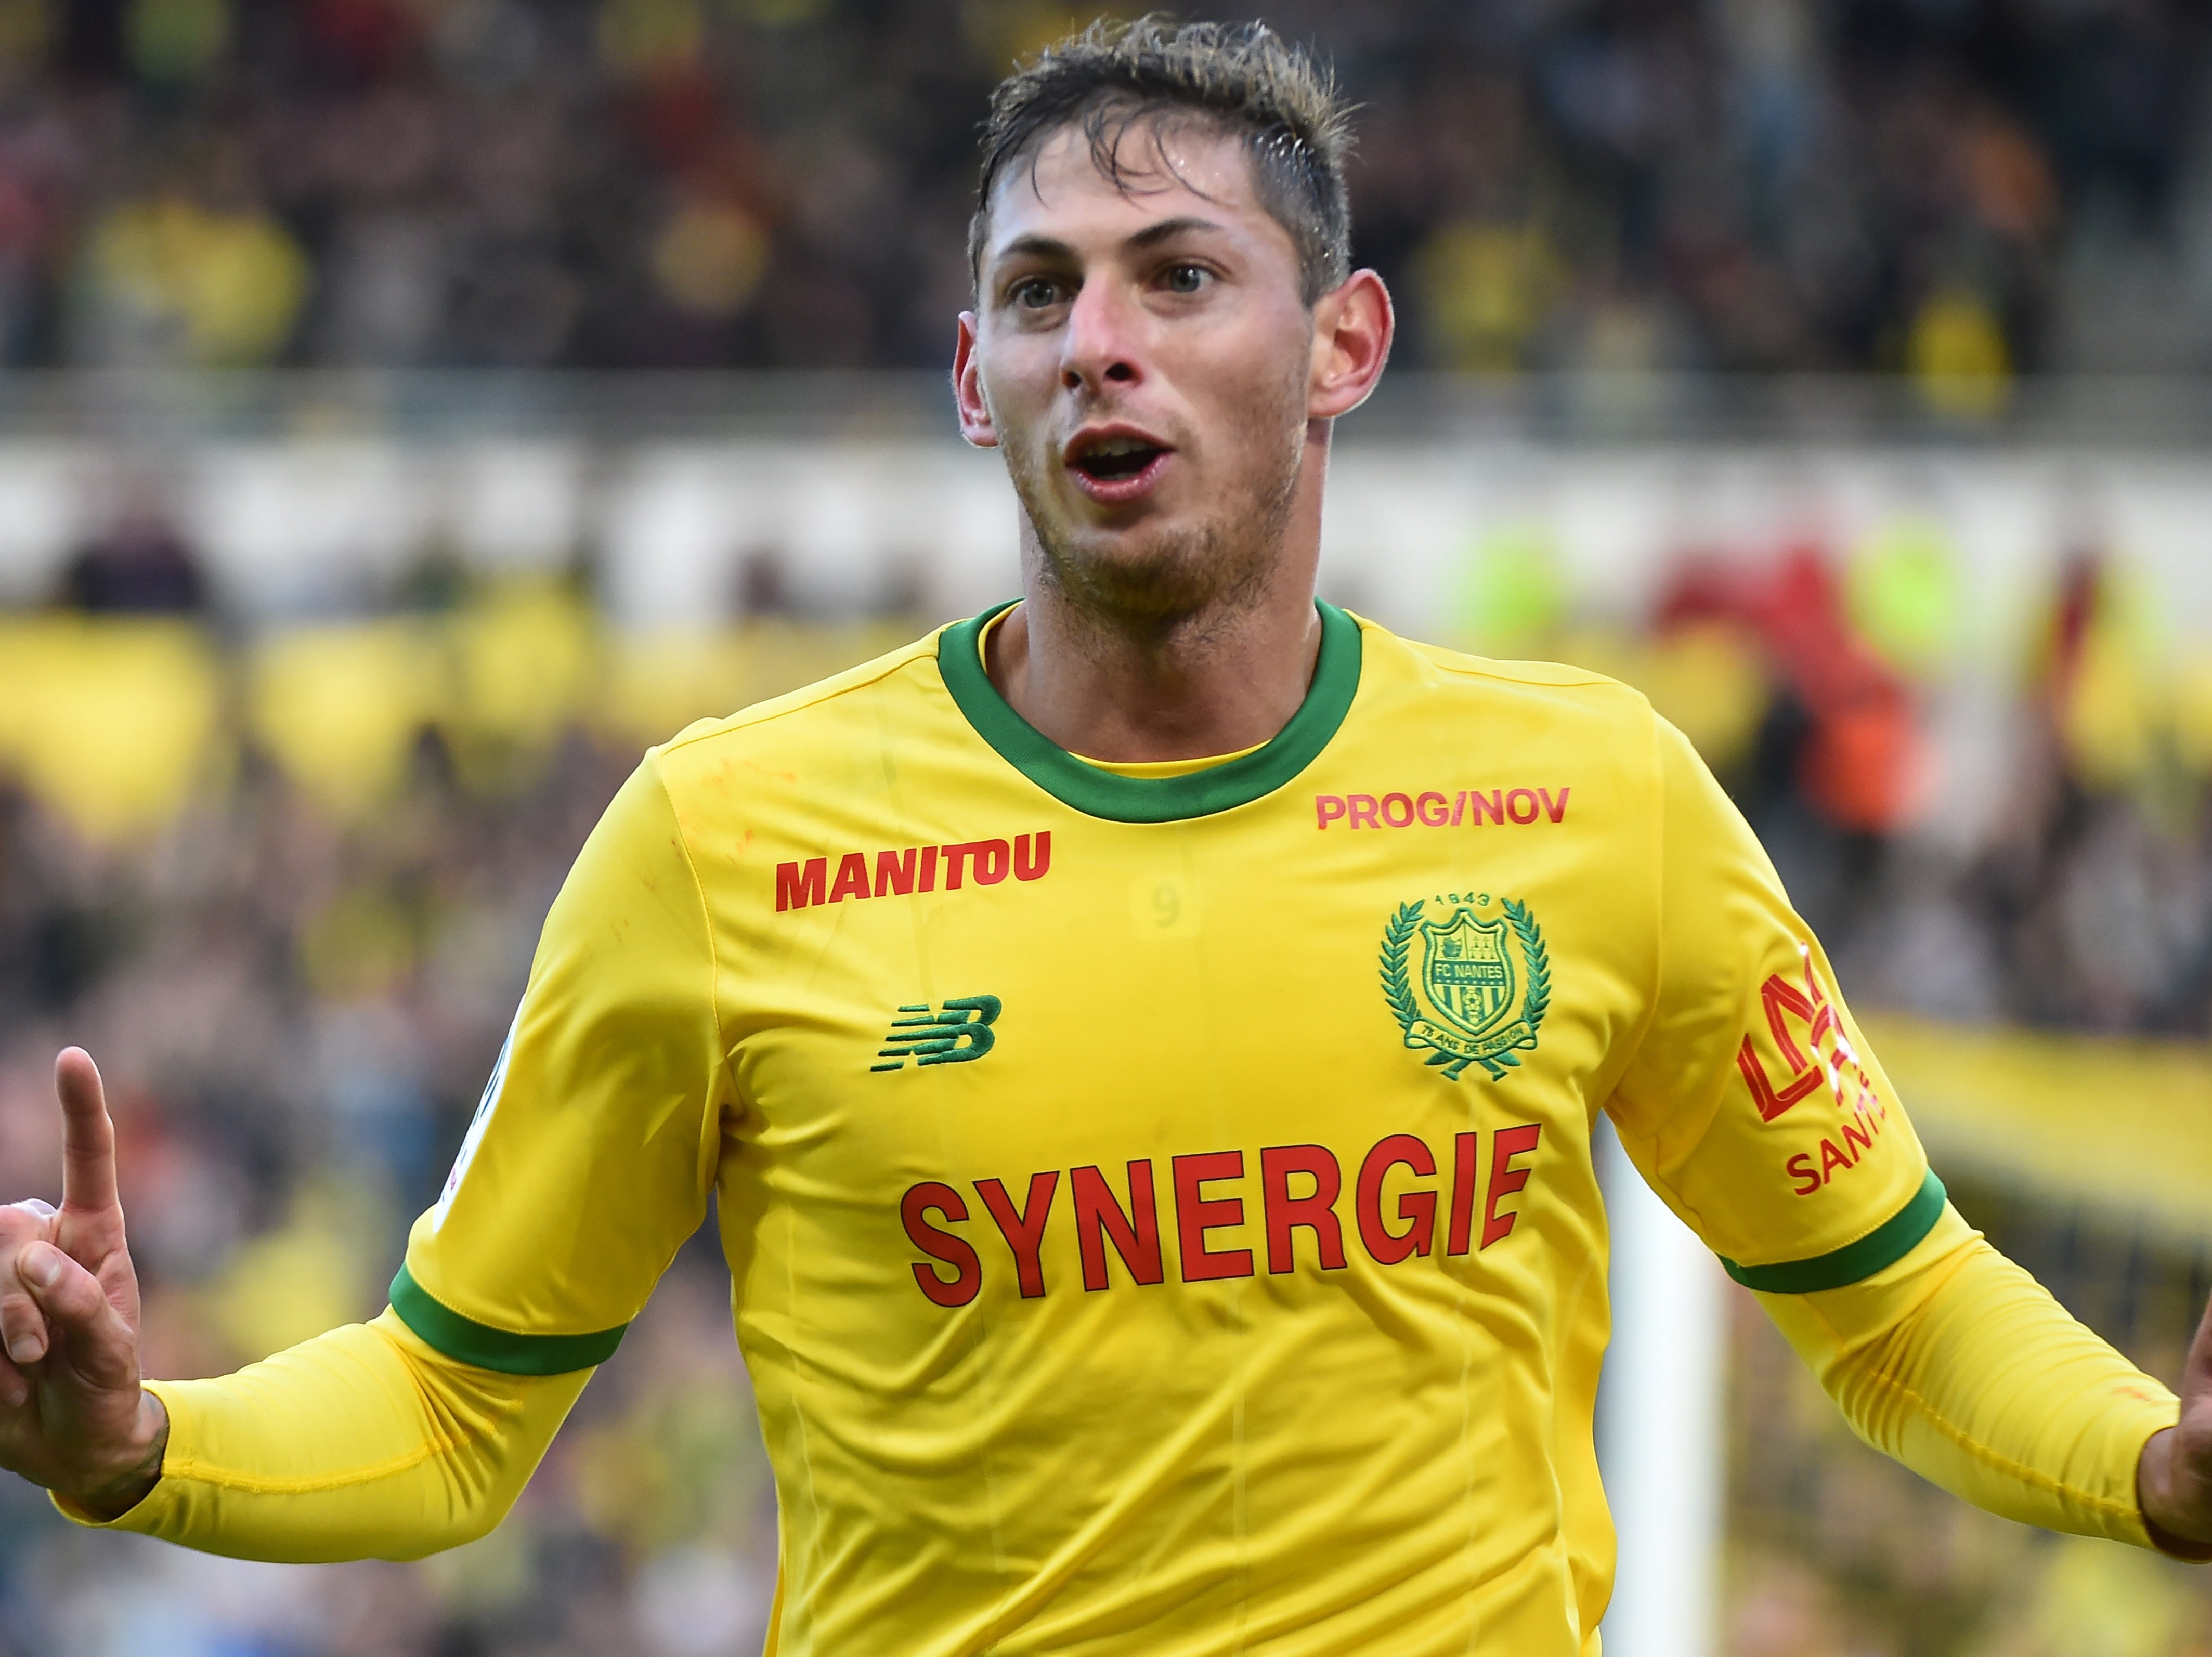 A pilot on trial over the plane crash that killed footballer Emiliano Sala organised the flight out of “financial interest”, a court has heard